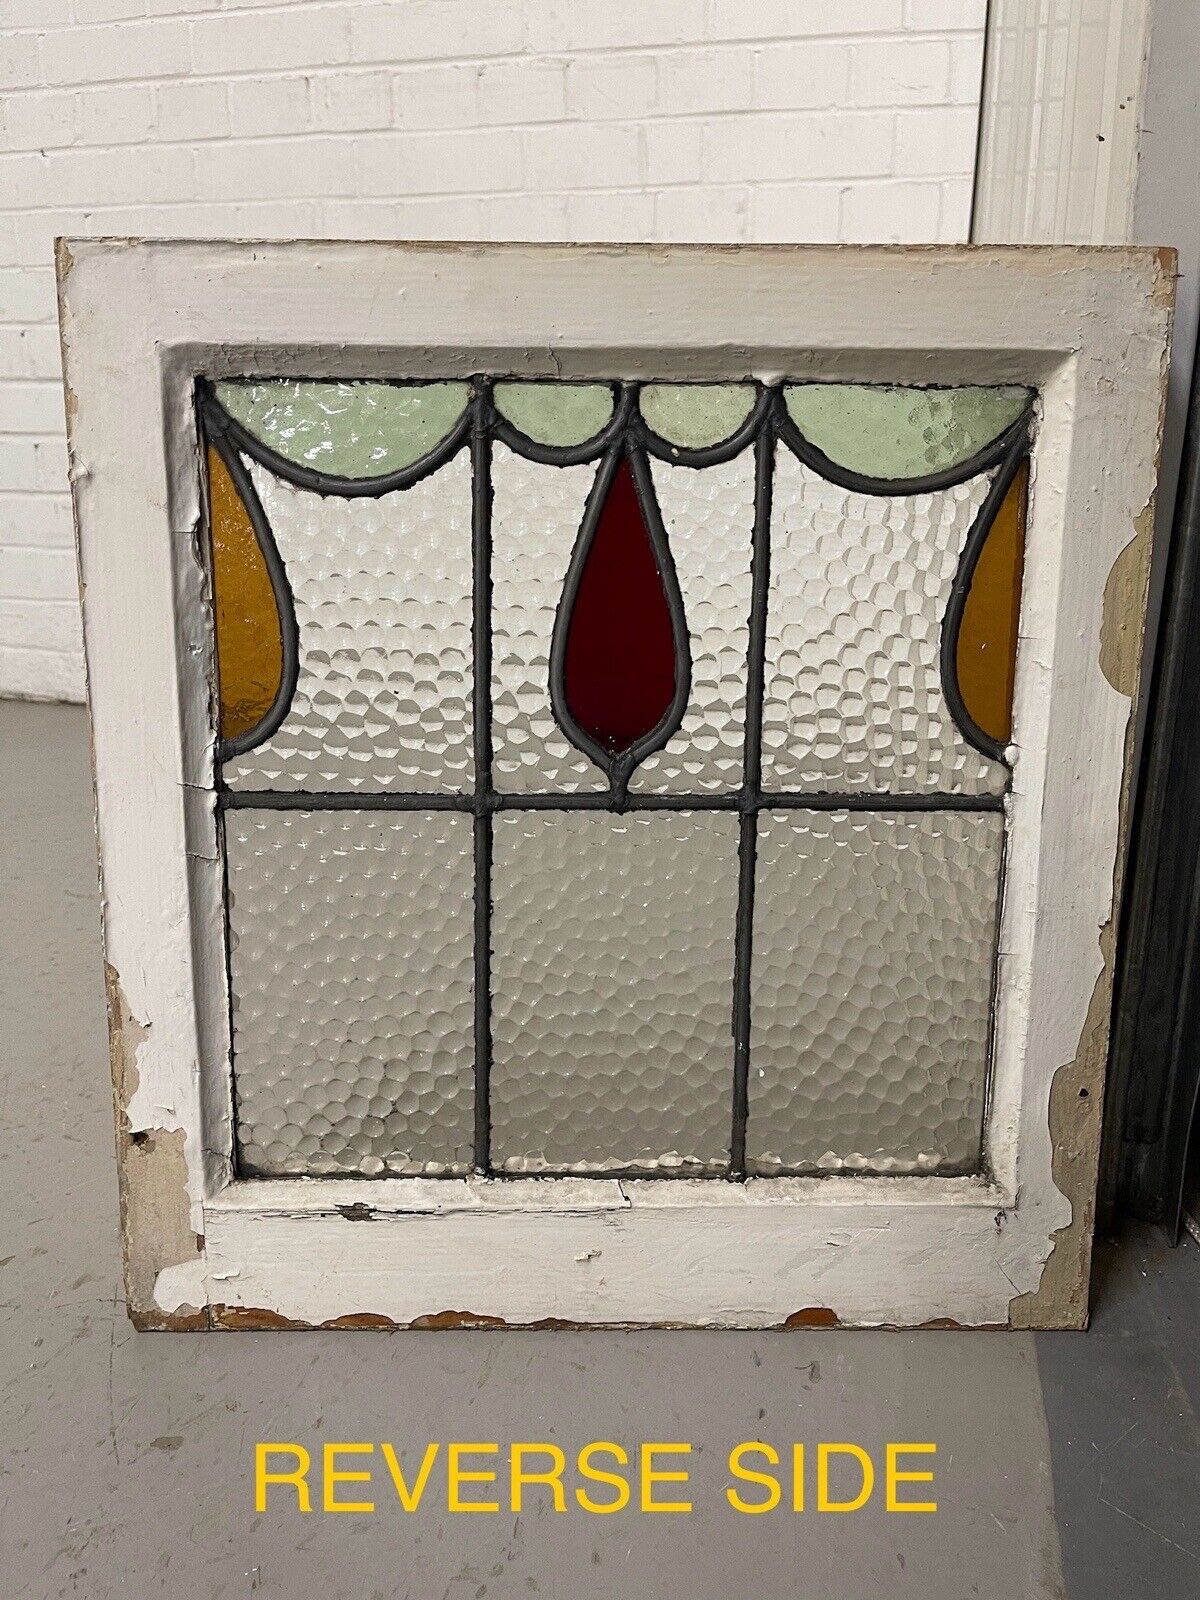 Reclaimed Leaded Light Stained Glass Window Panel 430 x 455mm